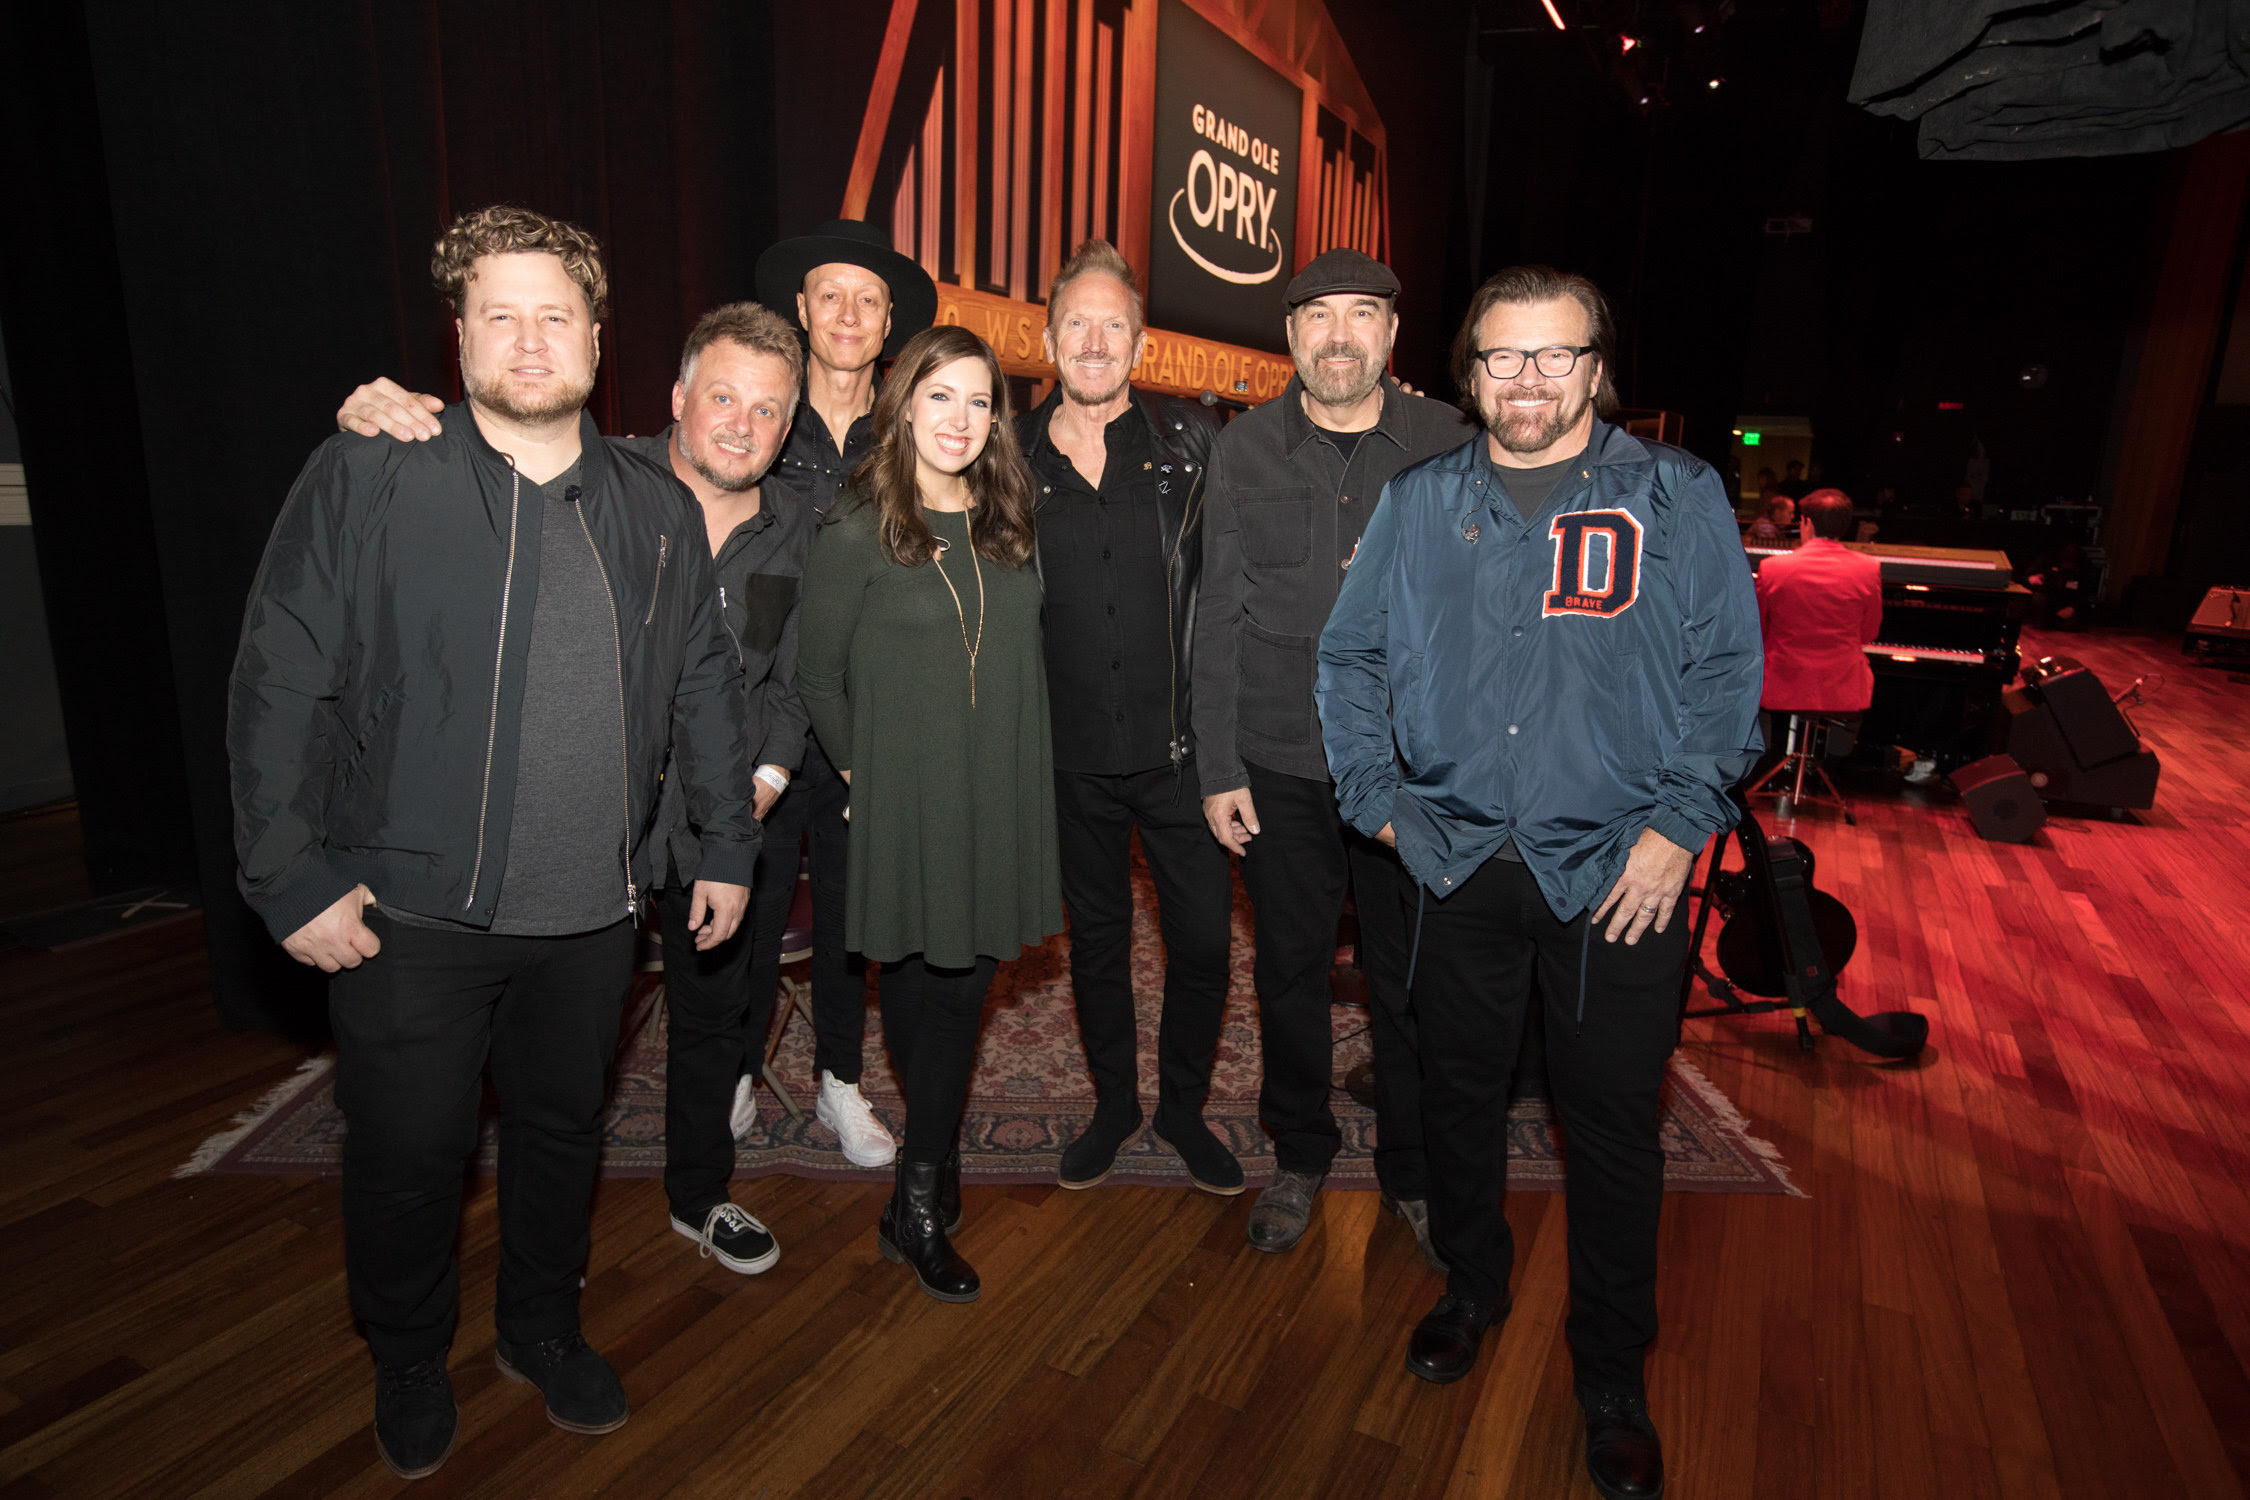 Pictured (l-r) on the Grand Ole OpryÂ® stage at Nashville's Ryman Auditorium are (l-r) NewSong's Mark Clay, Jack Pumphrey and Rico Thomas; Francesca Battistelli; and NewSong's Eddie Carswell, Billy Goodwin and Russ Lee. (photo: Chris Hollo for the Grand Ole Opry)